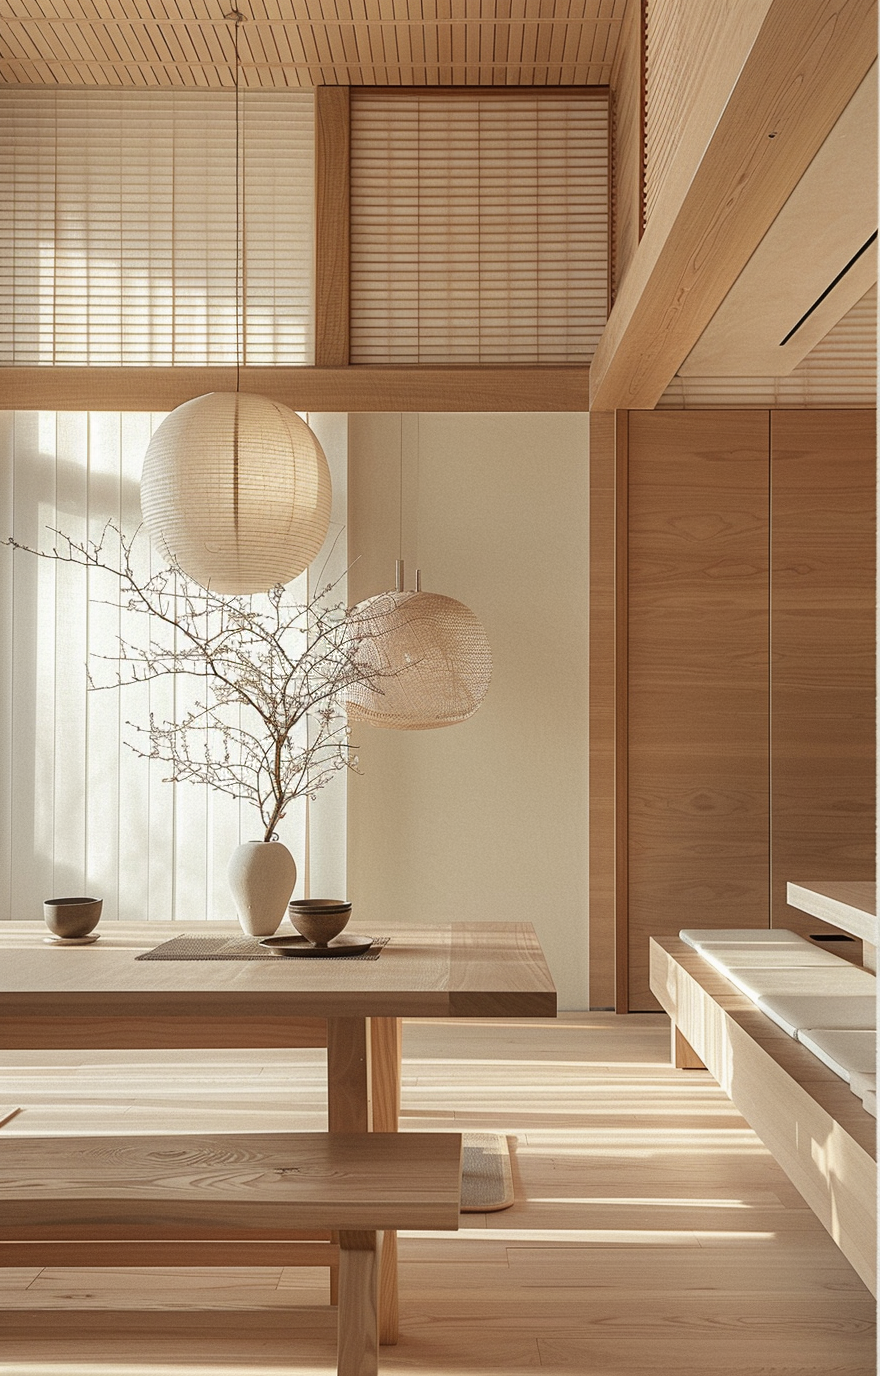 Japanese dining room with glass doors opening to a garden, blending indoor and outdoor spaces